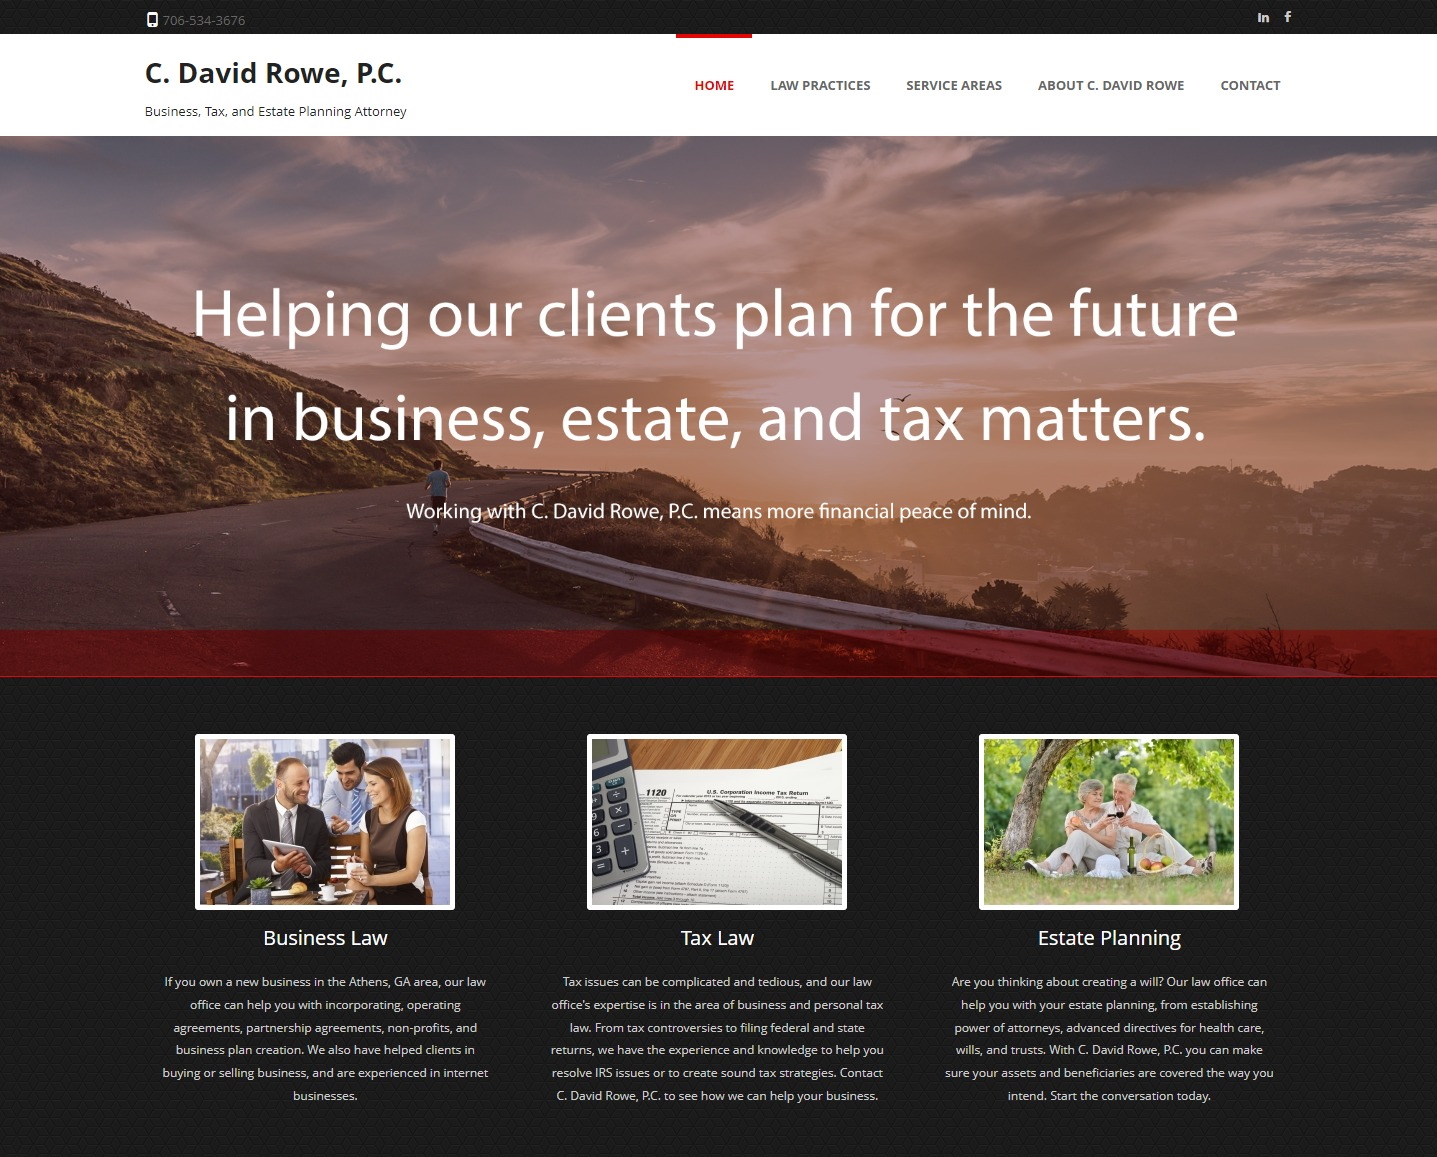 Digital Marketing Results for Law Firm Client